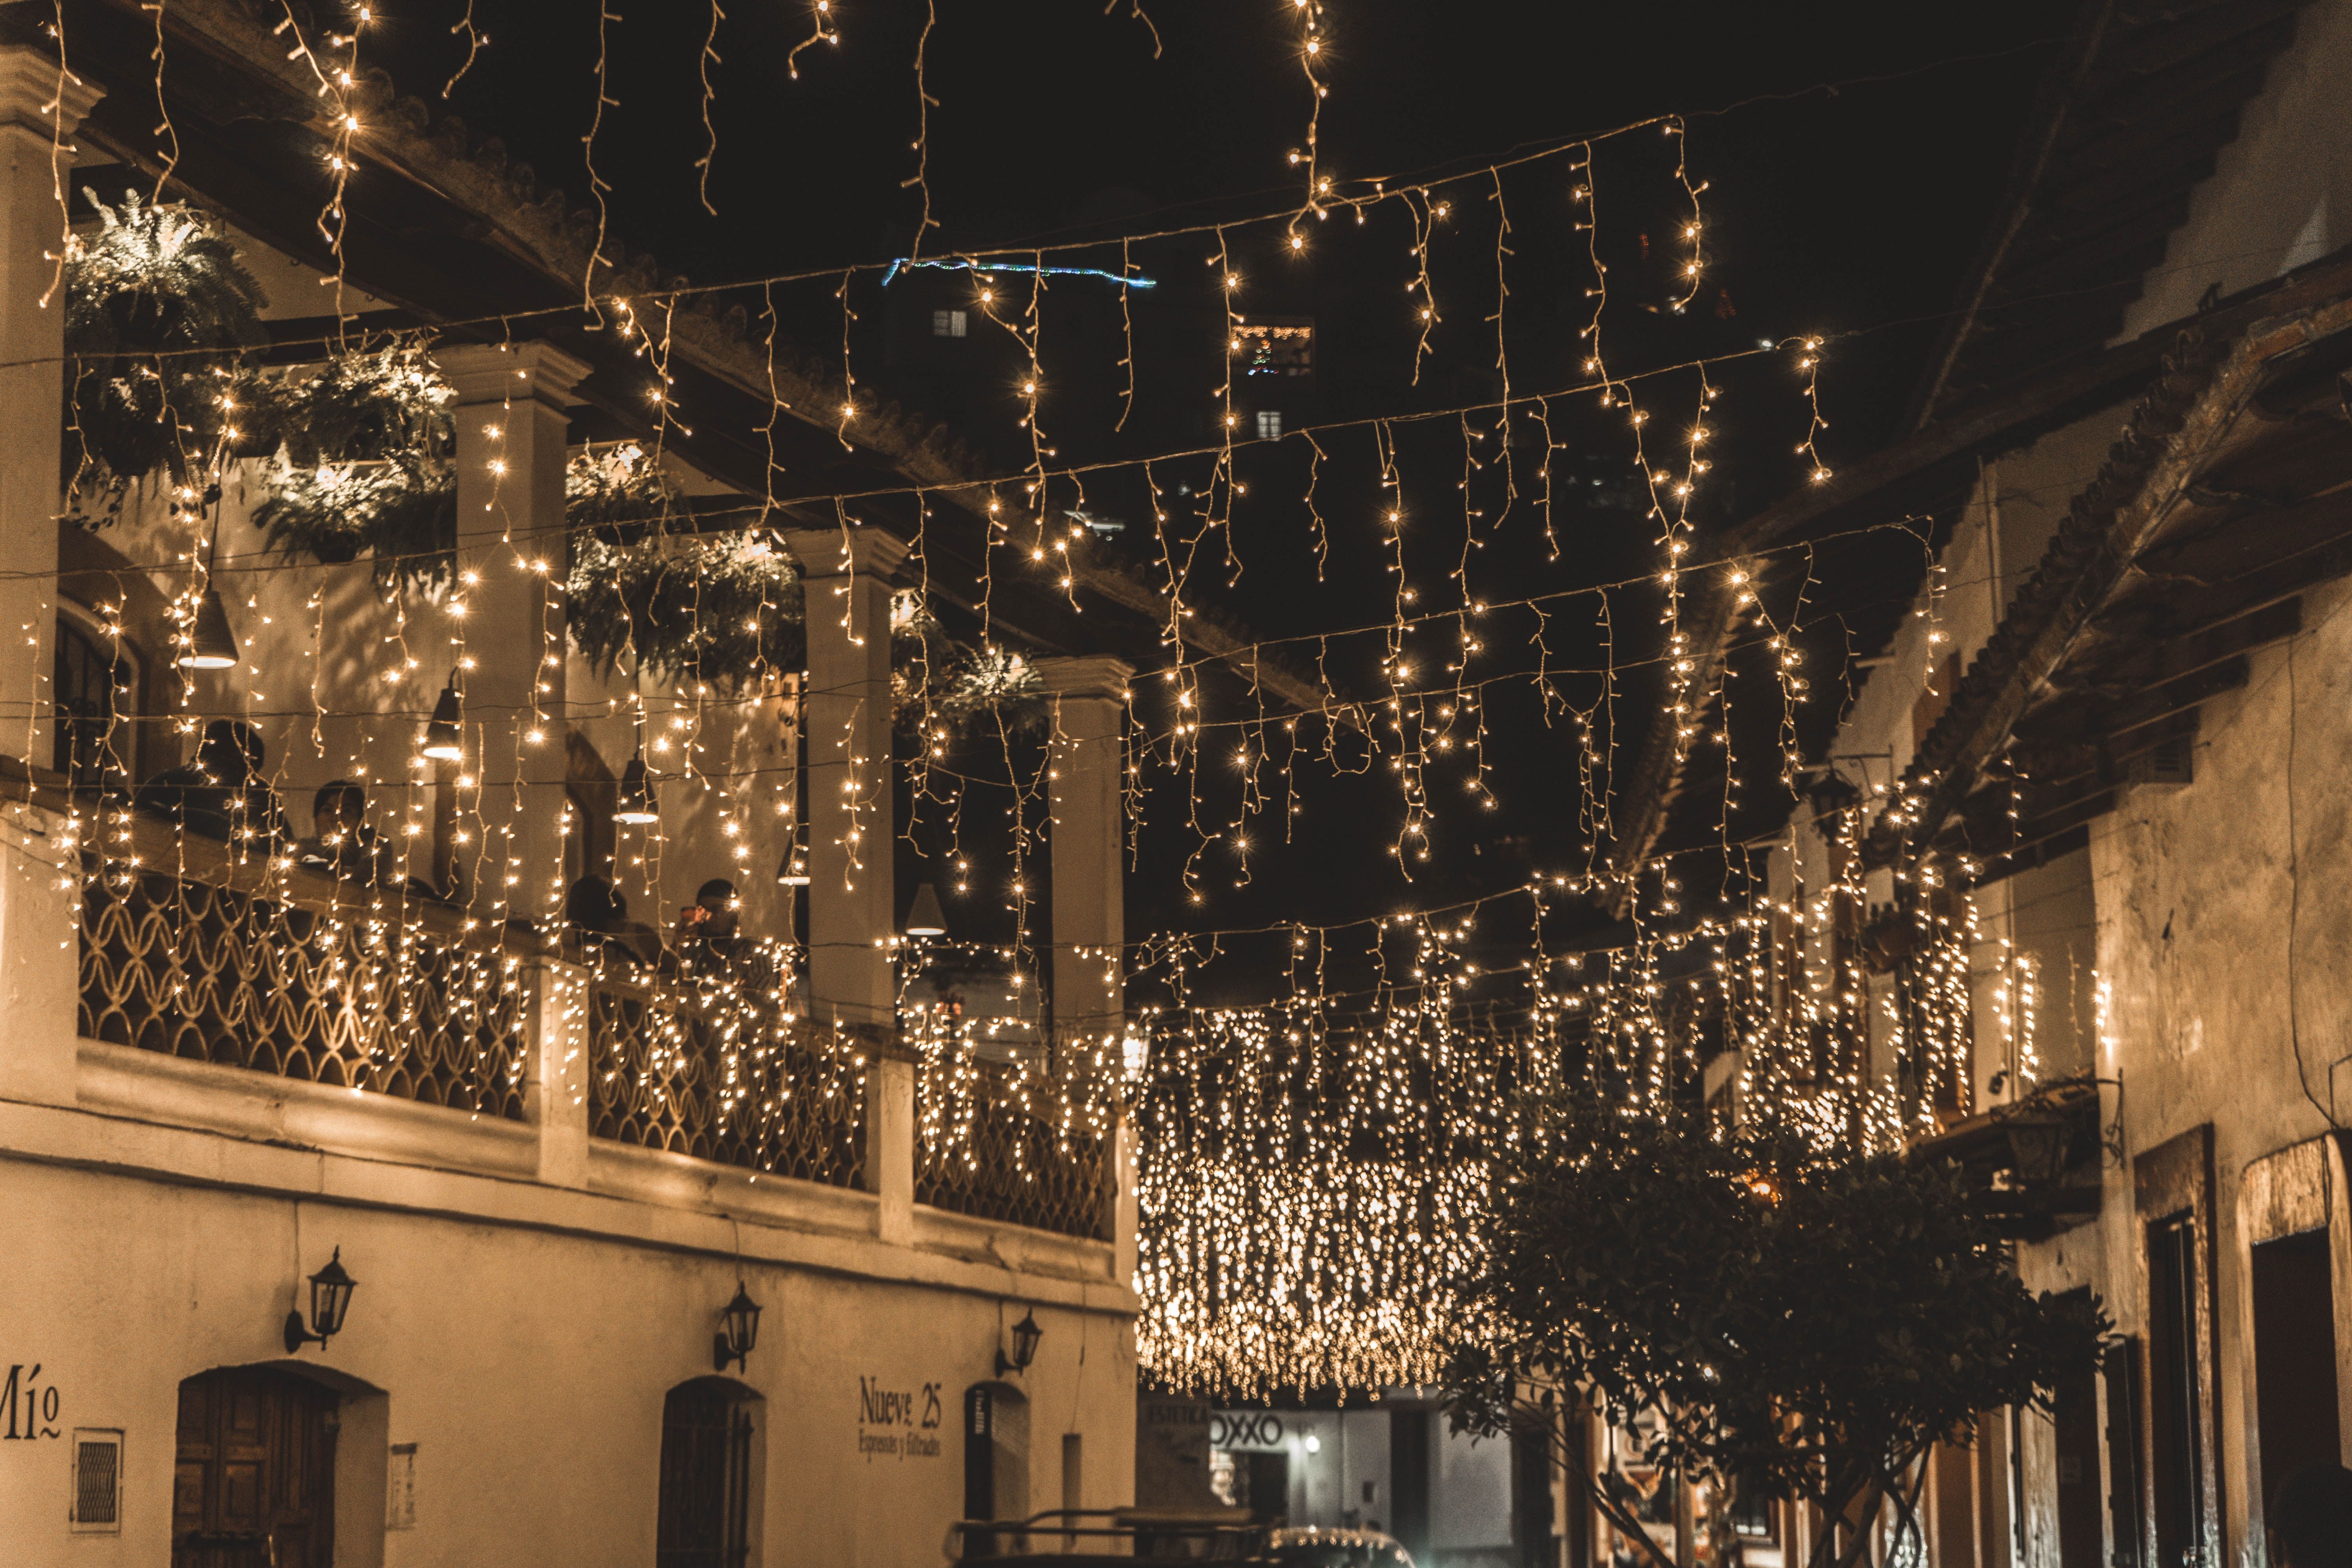 Mexico at Christmastime